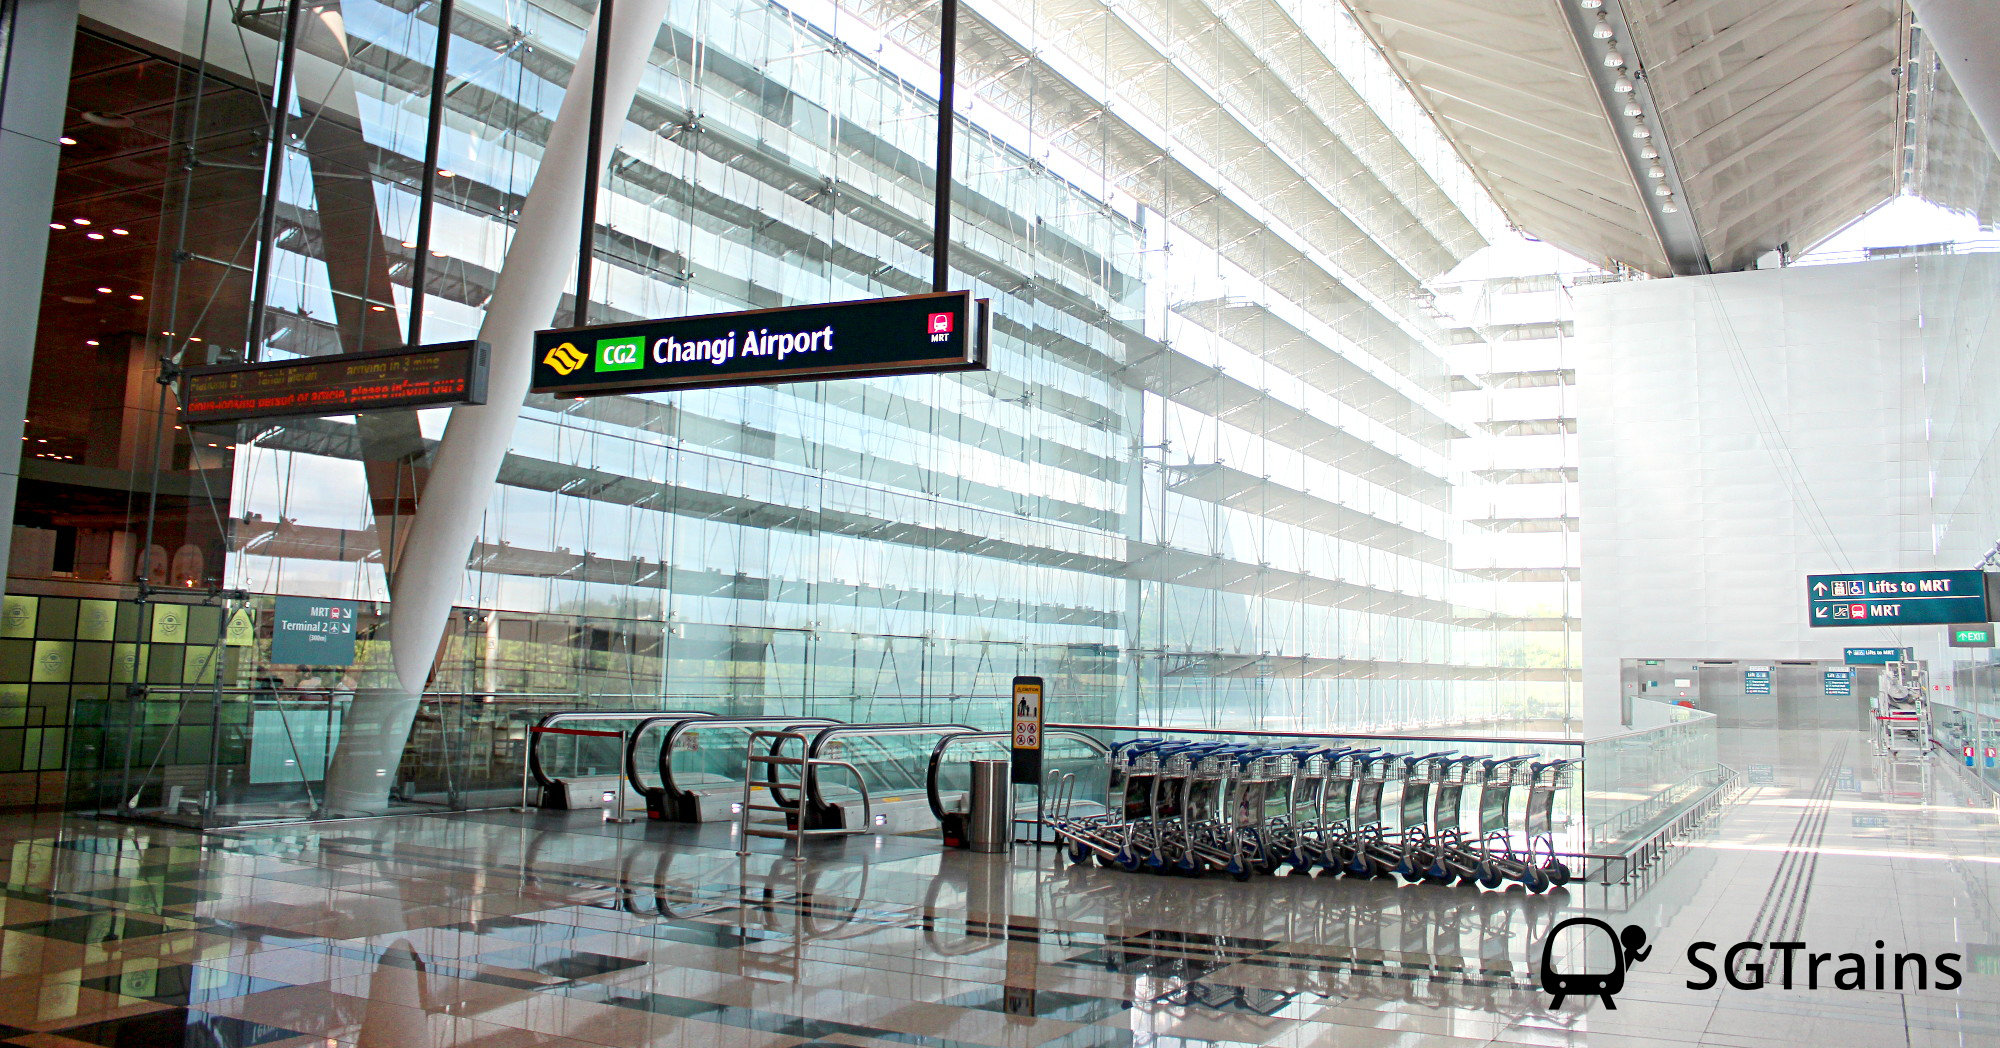 14 Day Closure of Changi Airport – MRT Station Remains Open, Access to Airport Is Restricted